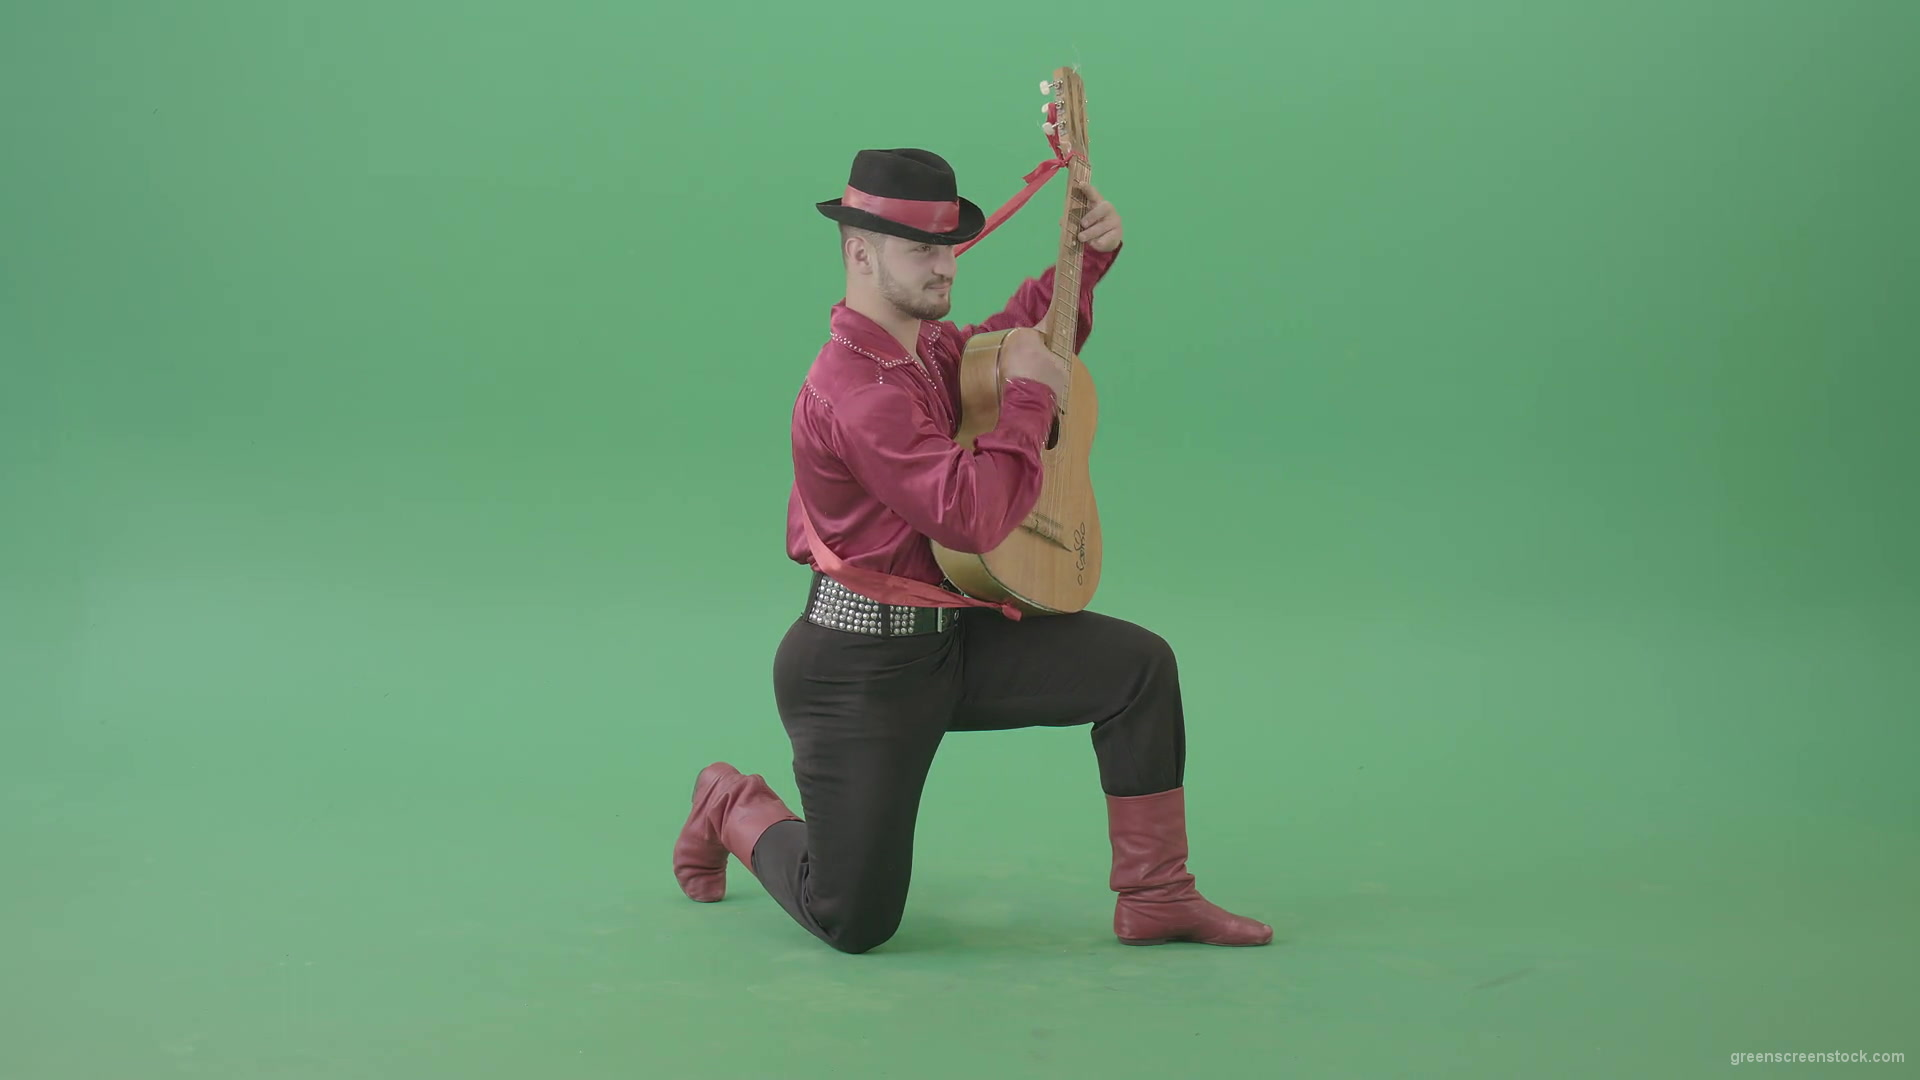 Man-in-Gipsy-costume-playing-love-song-on-guitar-isolated-on-green-screen-4K-Video-Footage-1920_002 Green Screen Stock